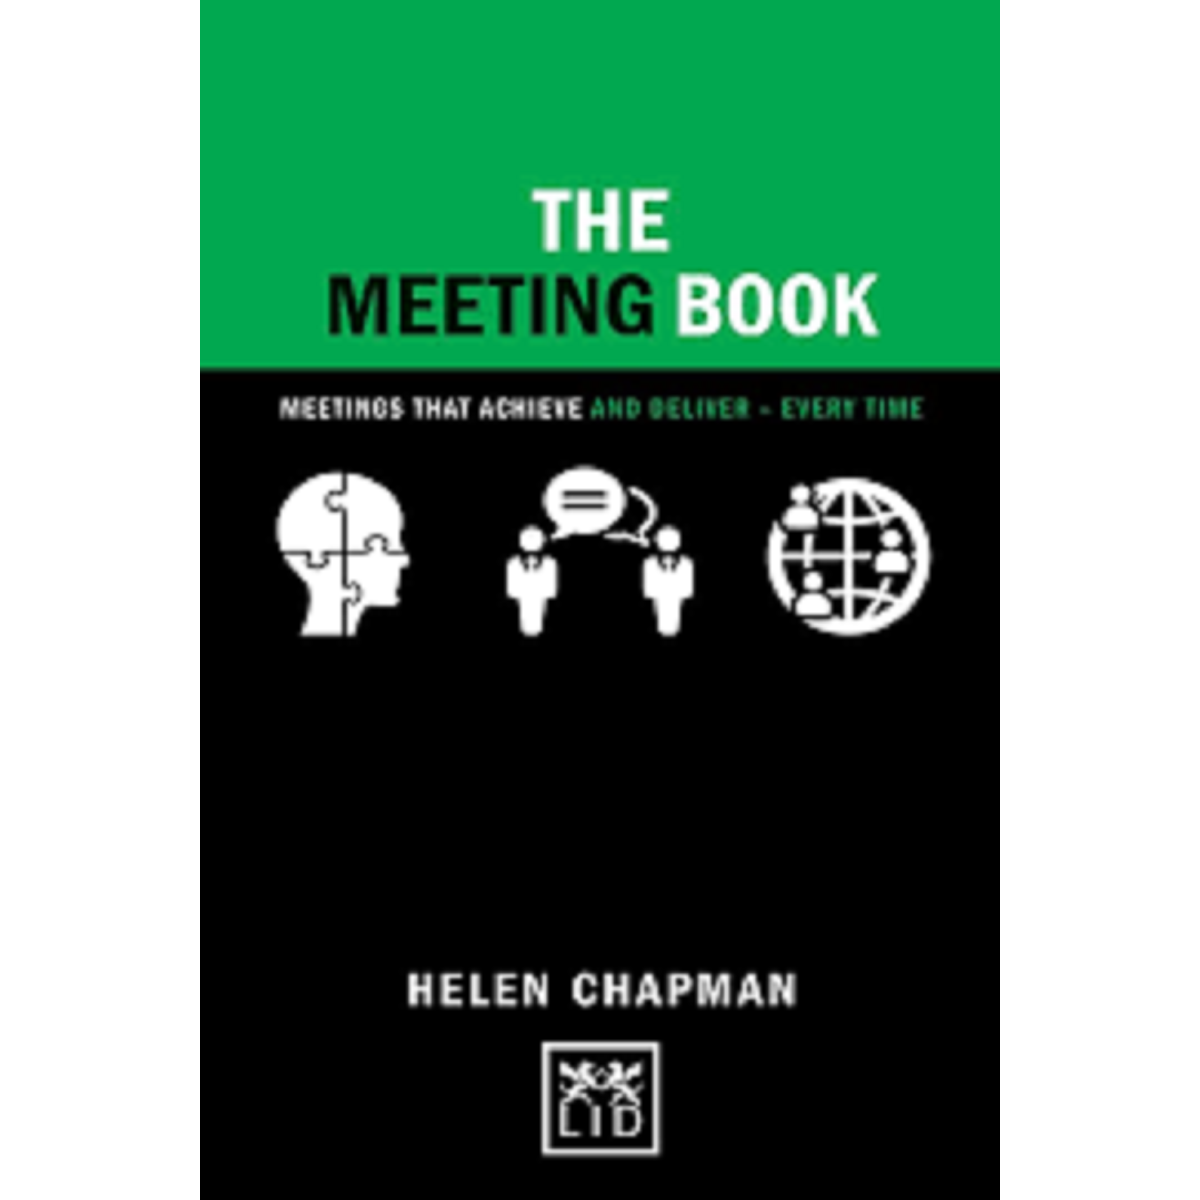 https://www.tarbiyahbooksplus.com/shop/business-economics-law-and-finance/the-meeting-book-by-helen-chapman/